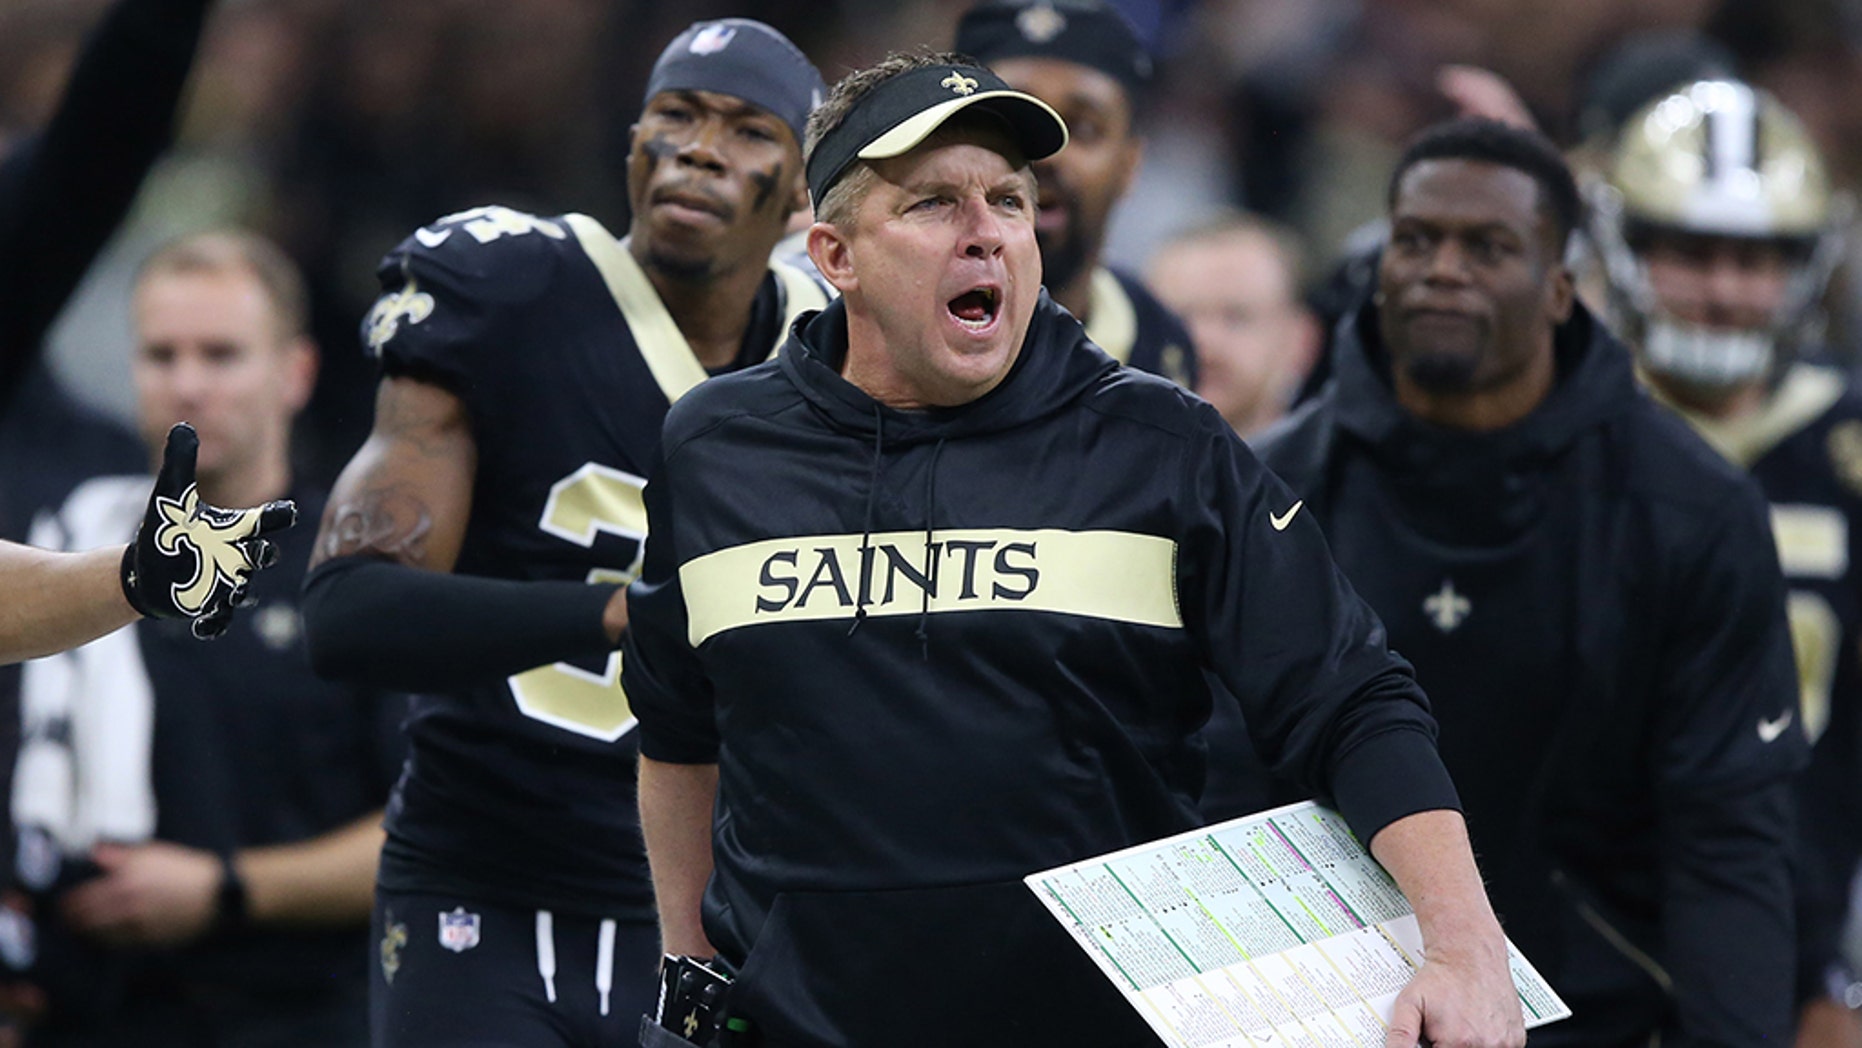 New Orleans Saints coach takes apparent dig at Goodell with Tshirt